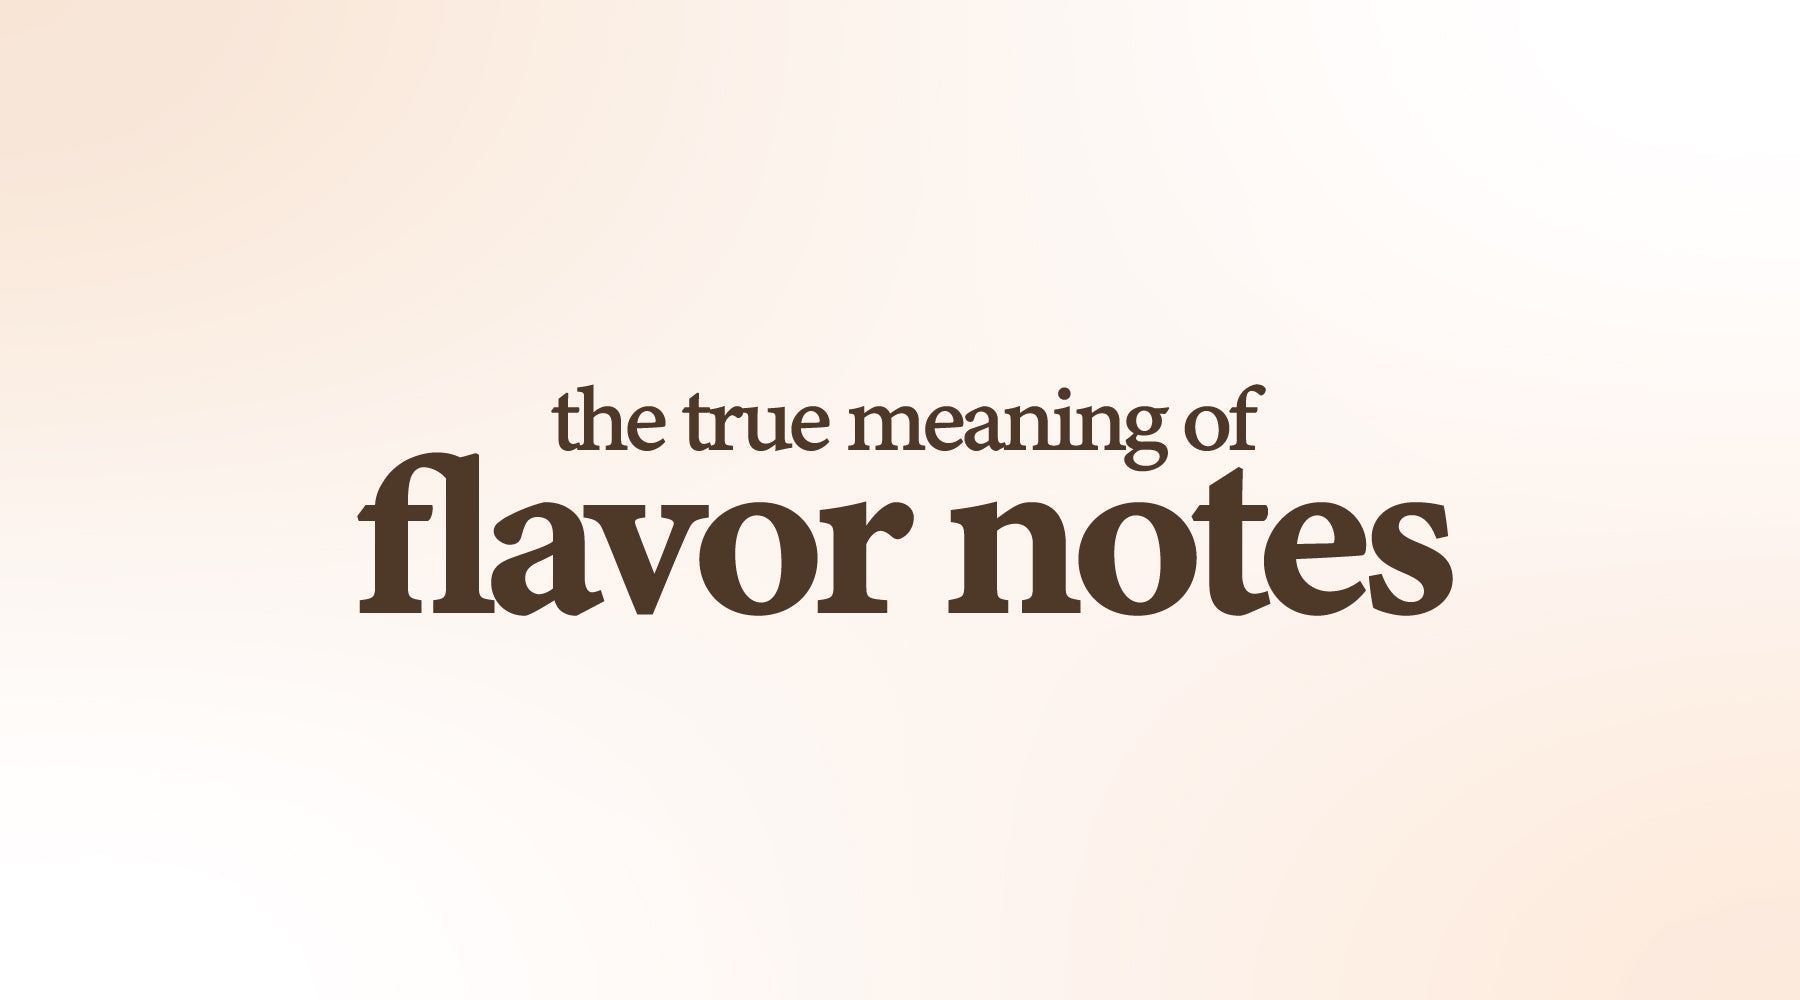 Cream and white background with brown text saying the true meaning of flavor notes